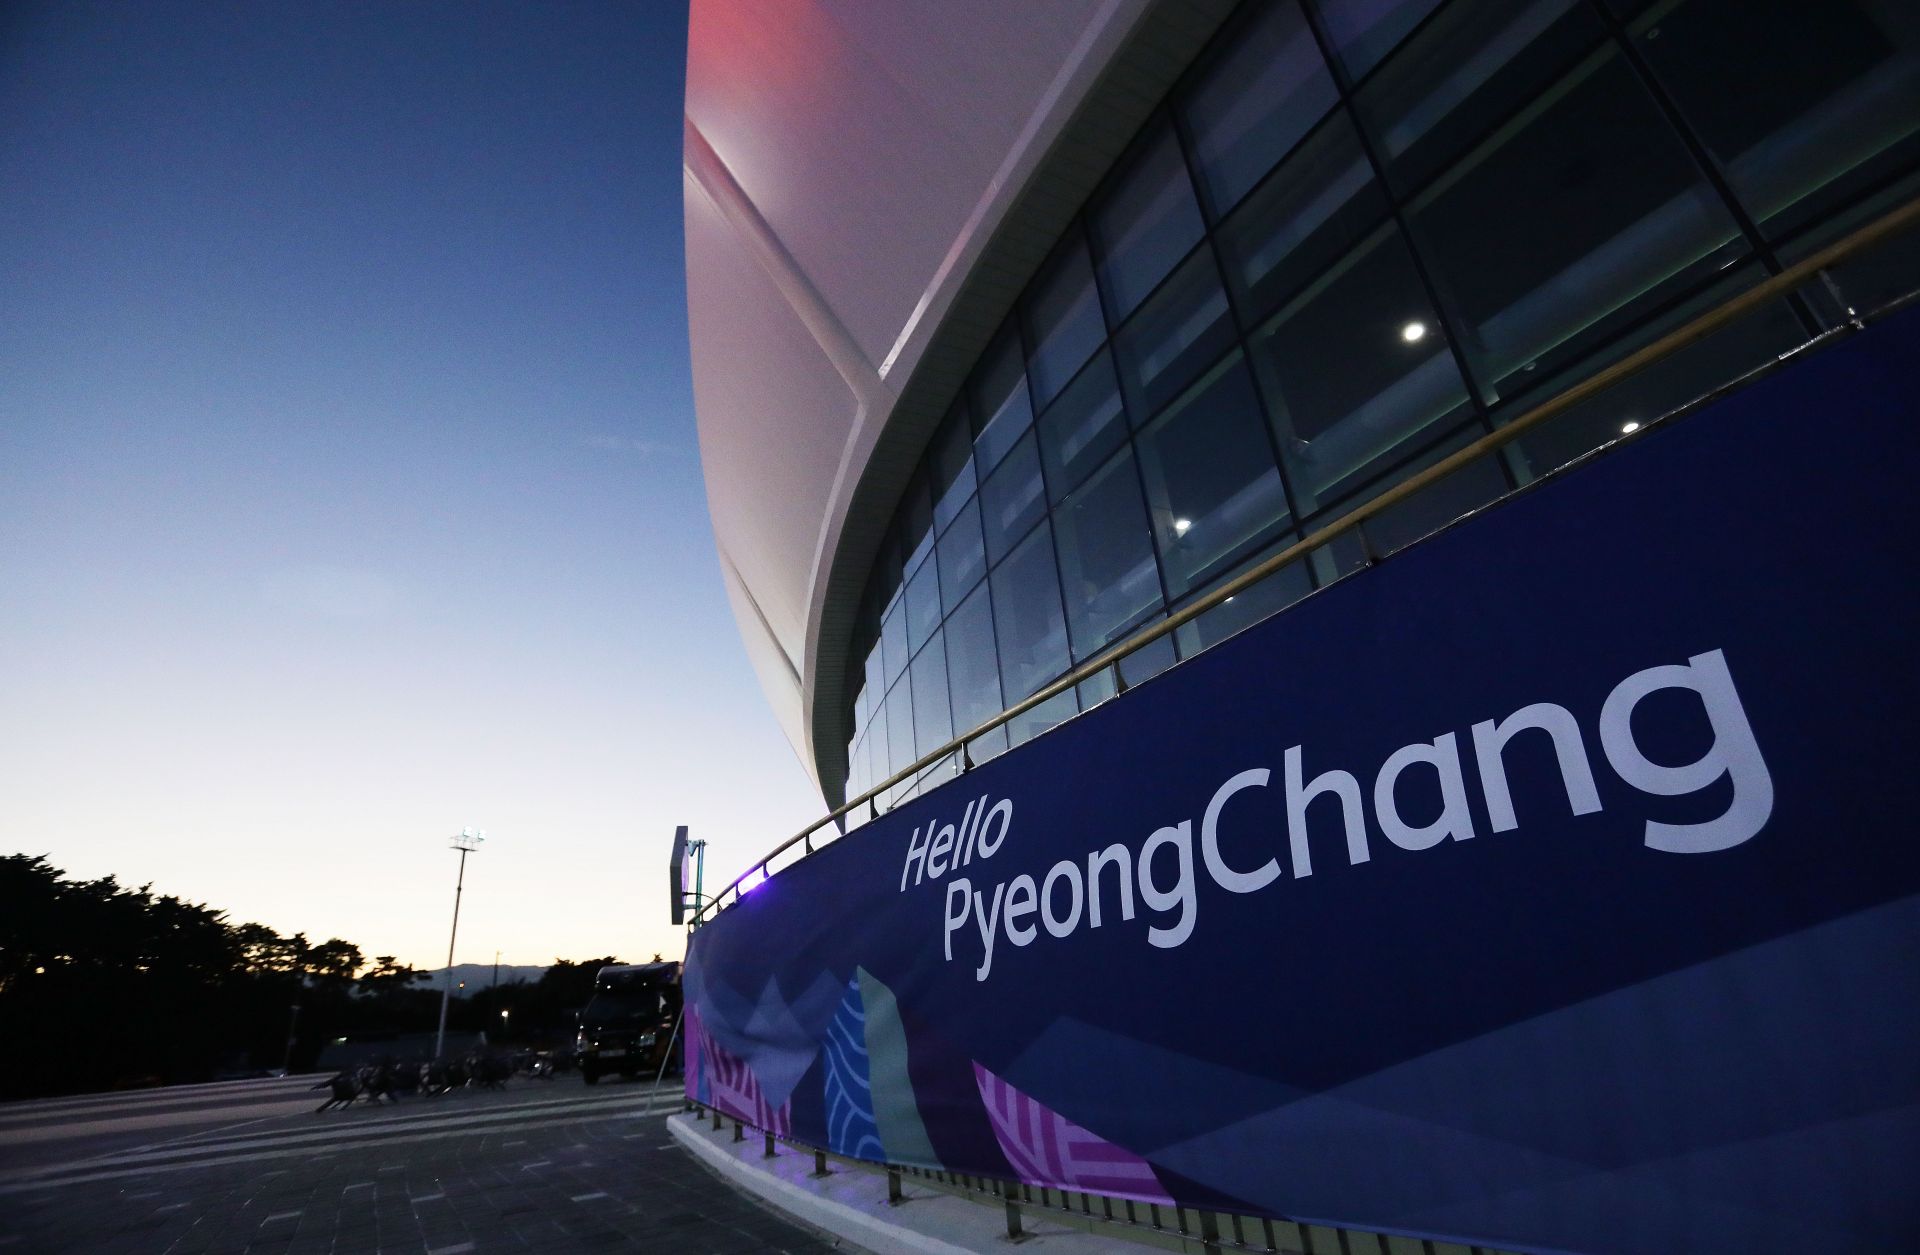 North and South Korea will march under a unified banner as the Winter Olympics kick off in Pyeongchang, South Korea.